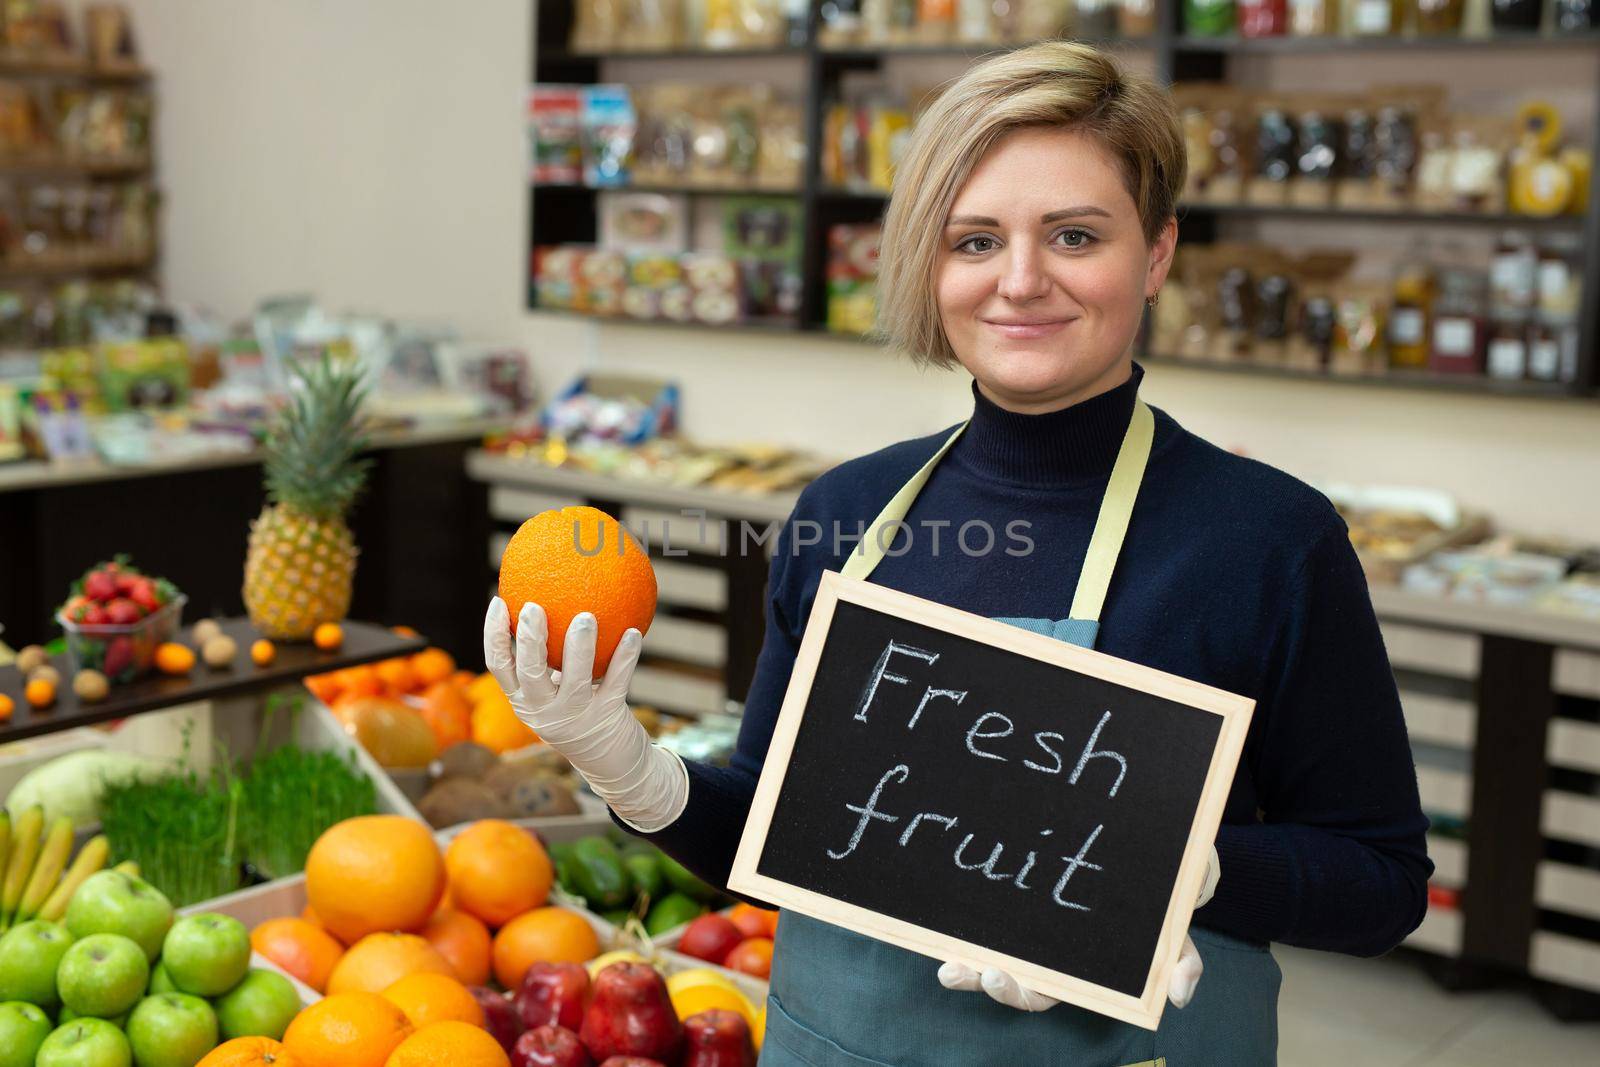 Portrait of a young saleswoman with a sign in her hands fresh fruit.